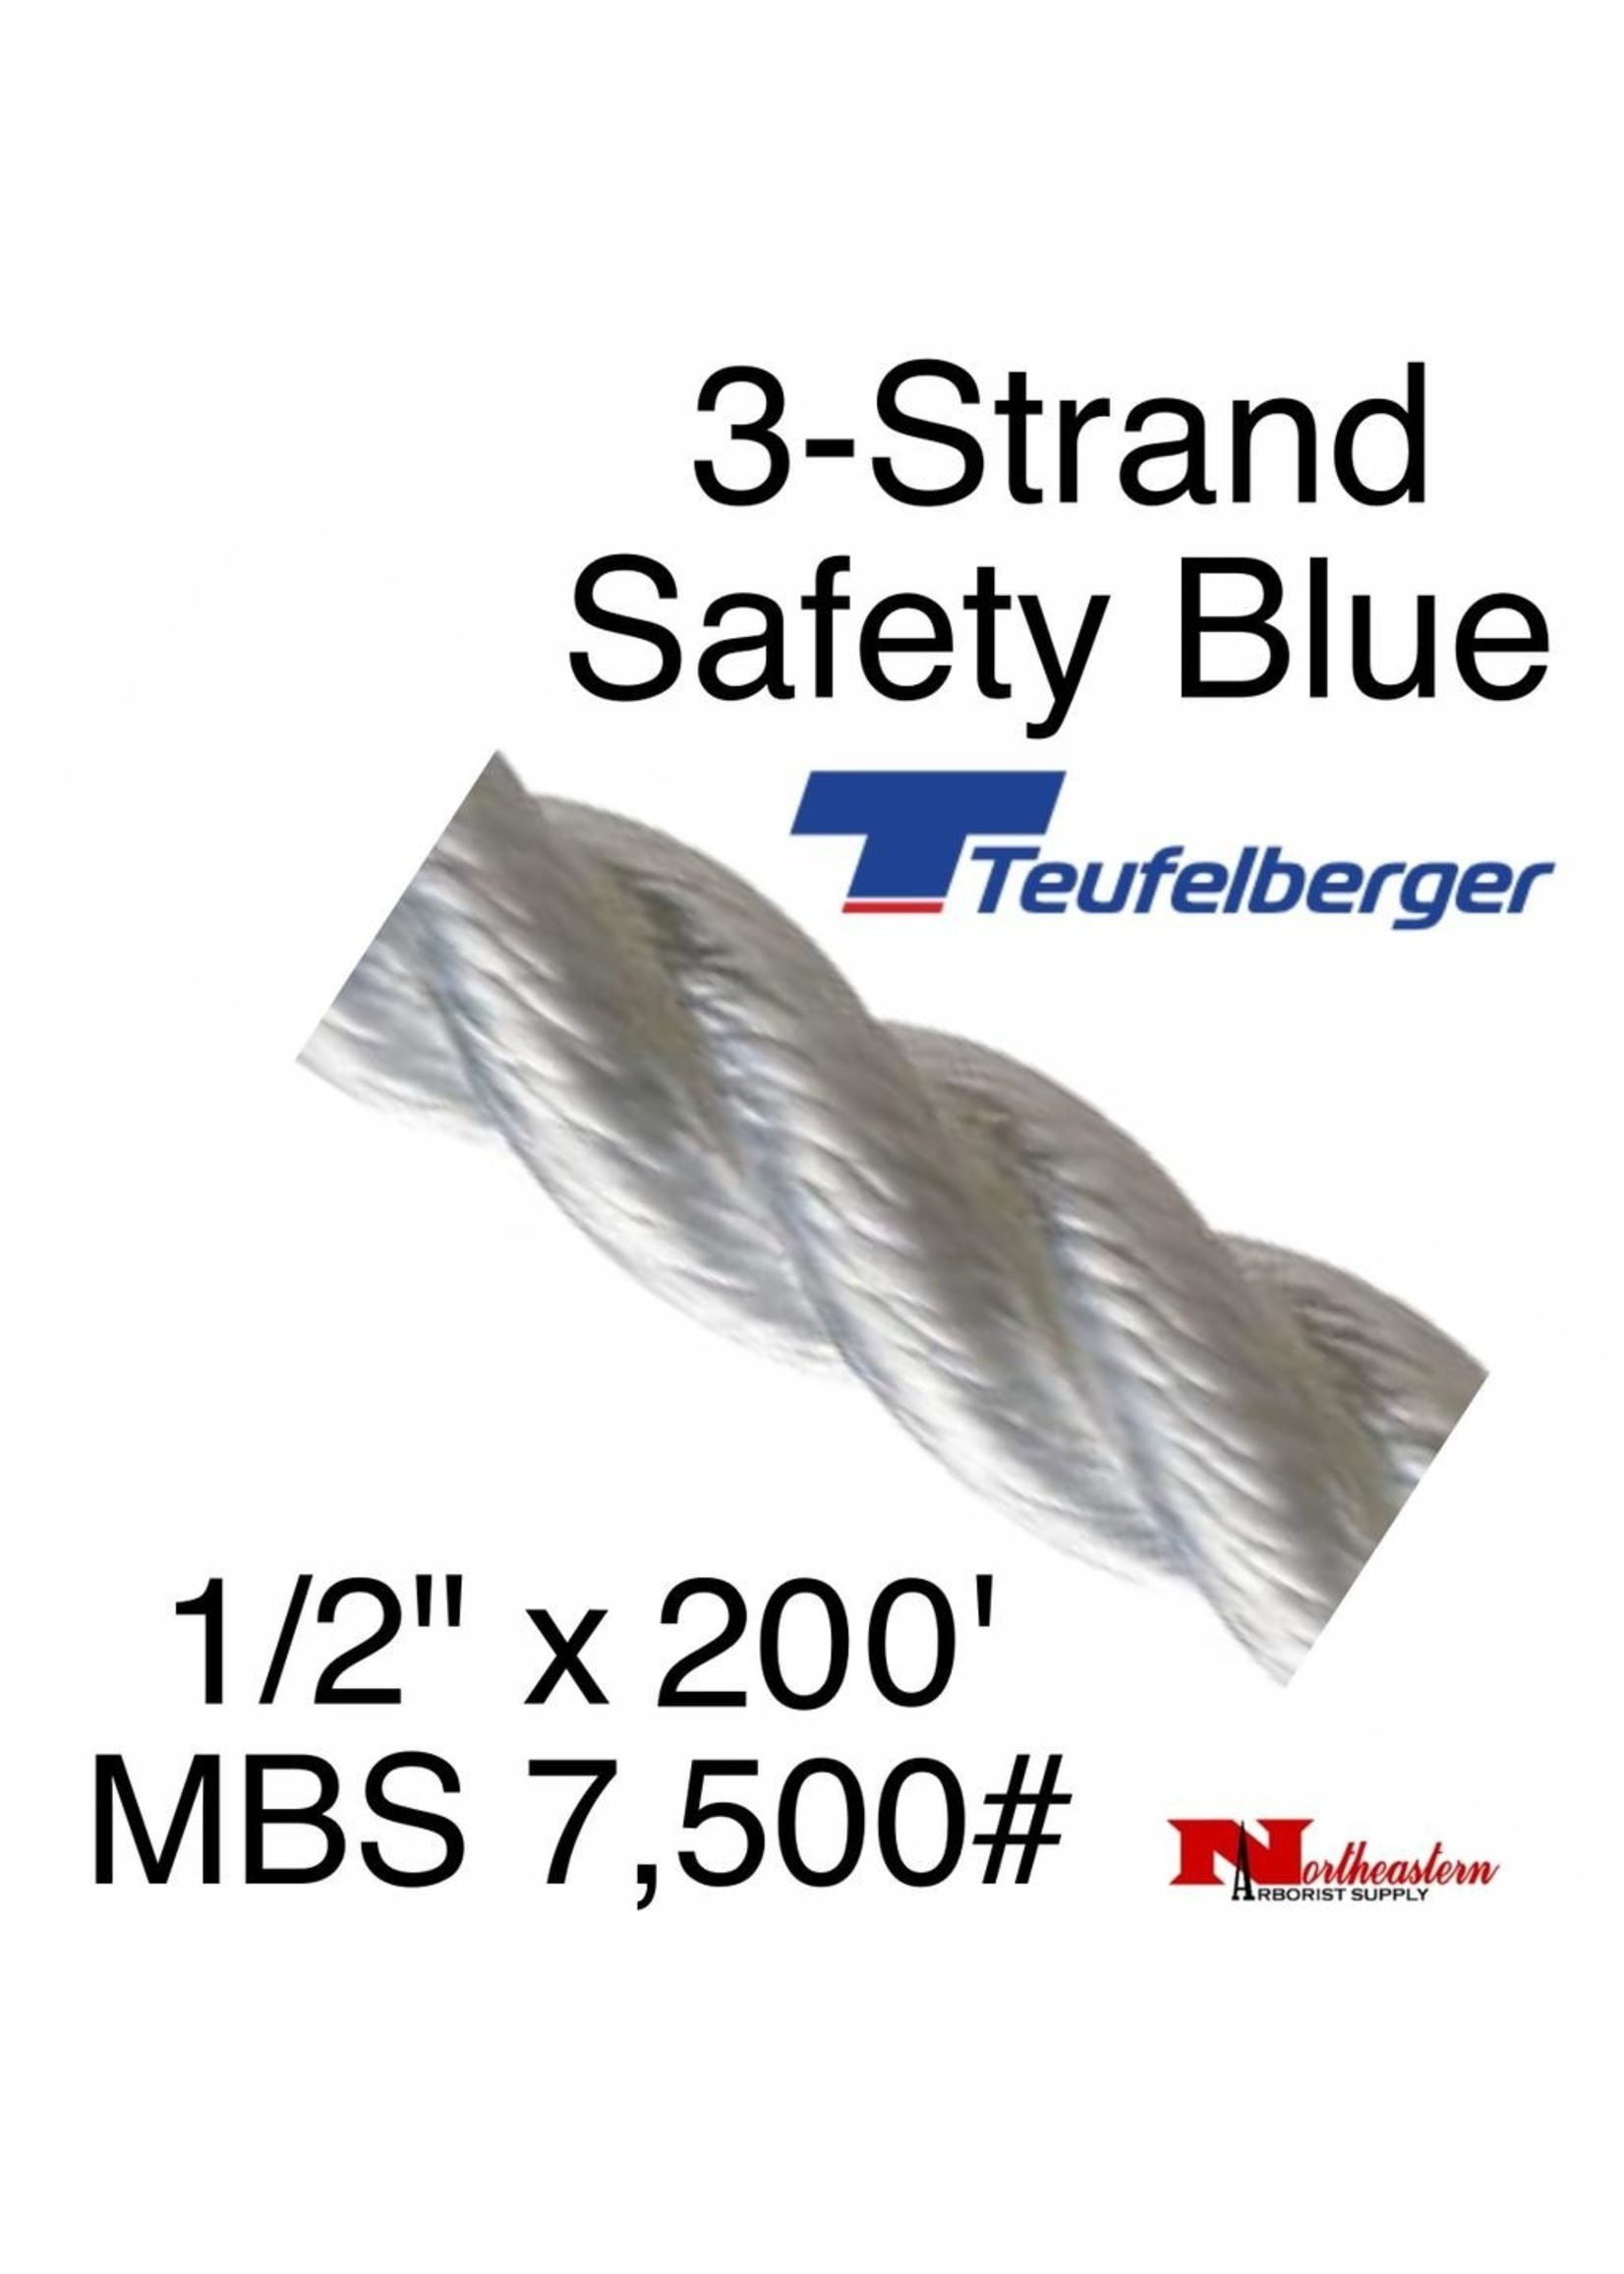 Teufelberger Safety Blue 3-Strand 1/2" x 200' by New England Ropes #6,500